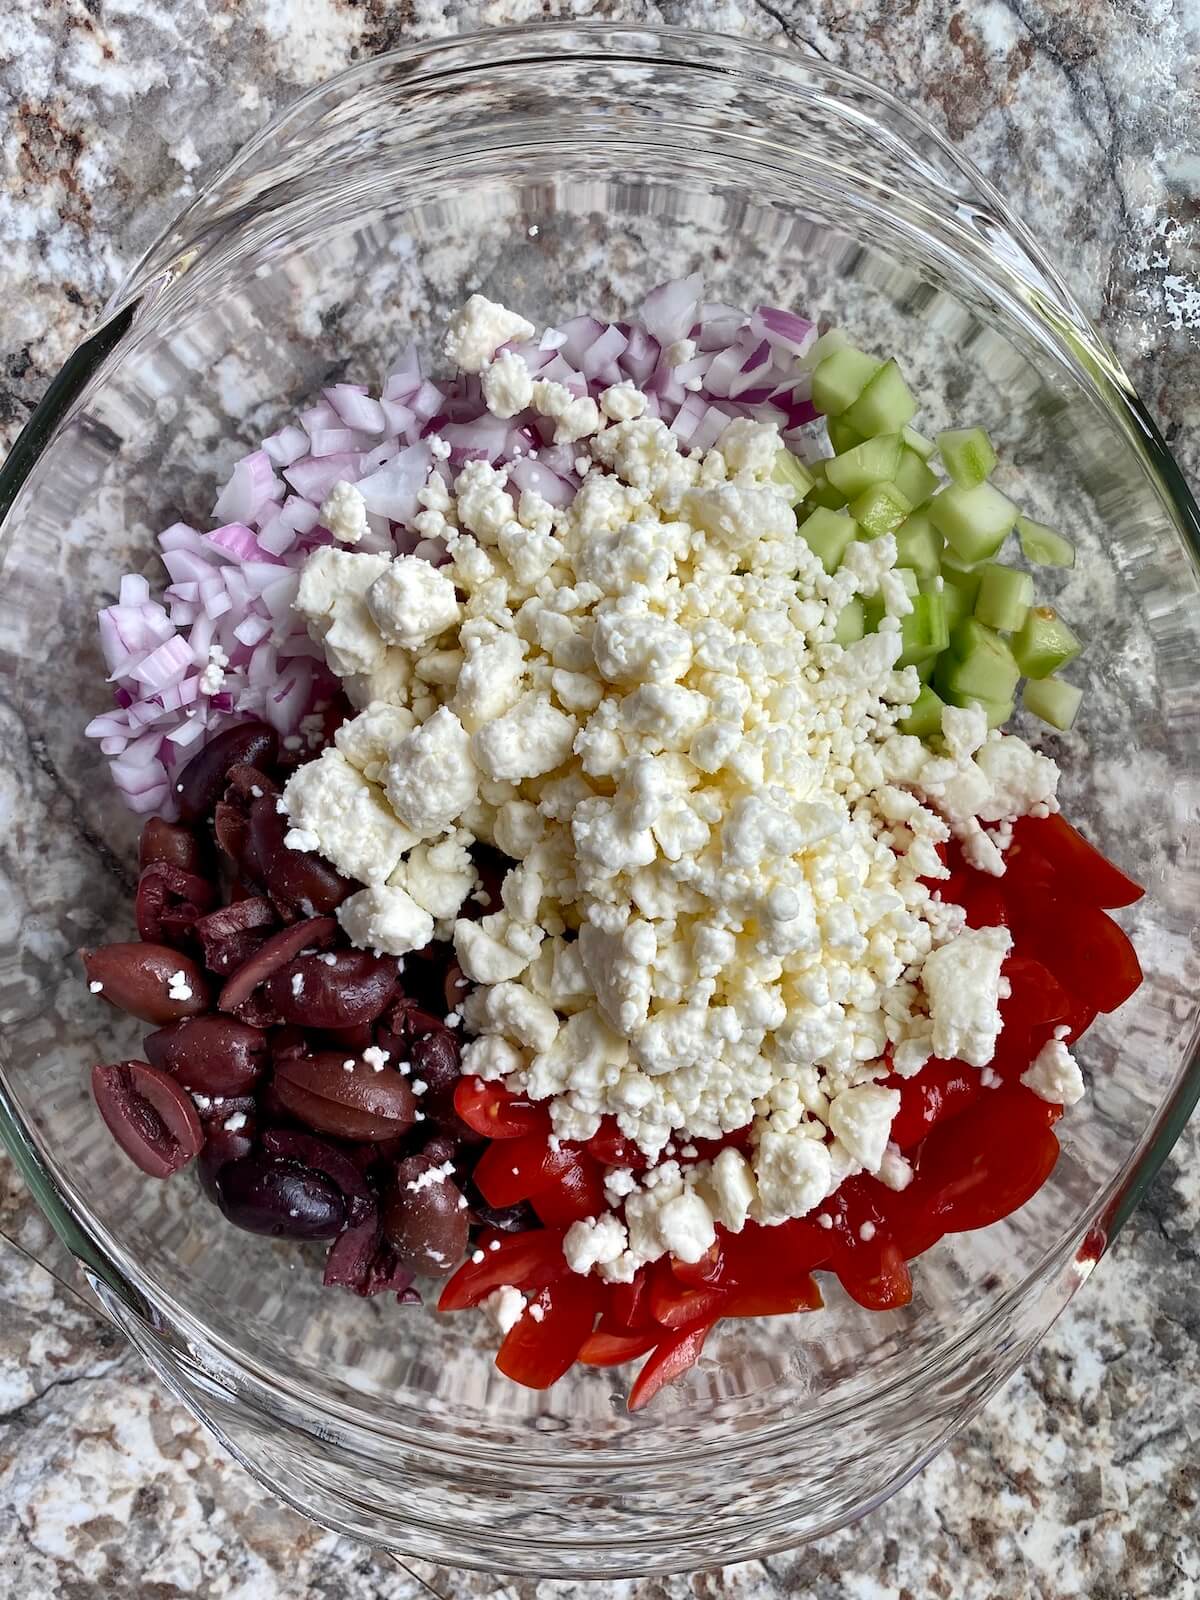 Chopped cucumber, red onion, cherry tomatoes, Kalamata olives, and feta cheese in a clear glass mixing bowl.